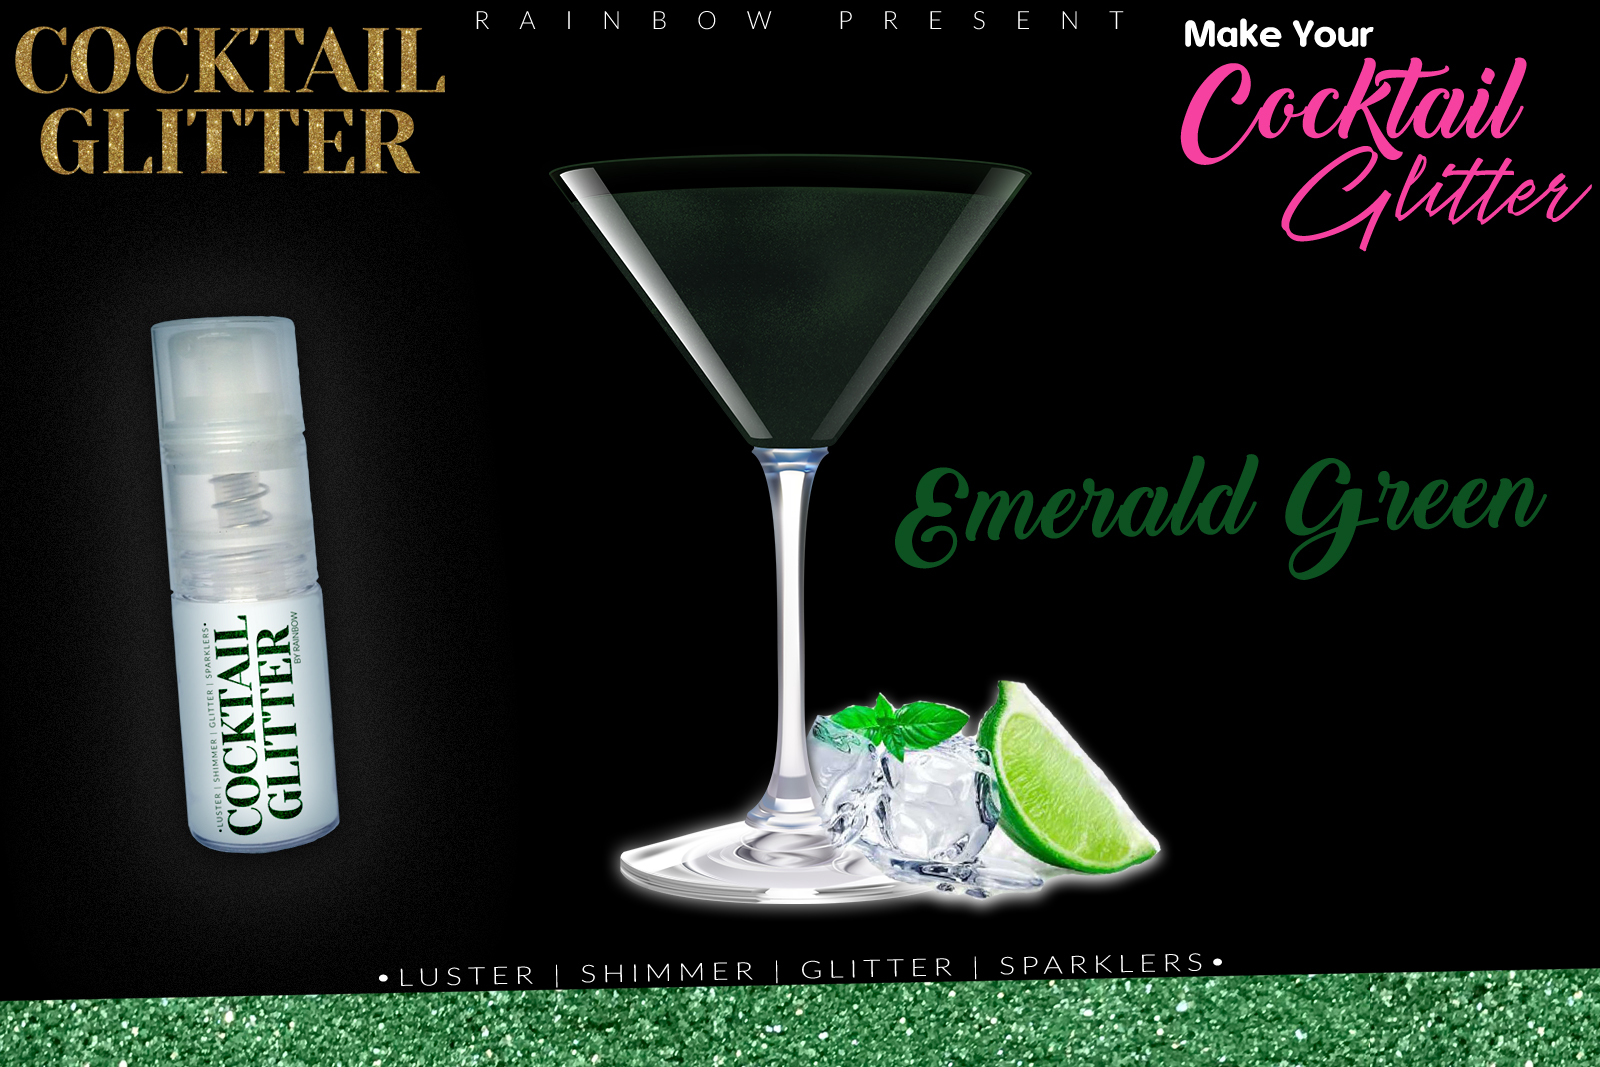 Glitzy Cocktail Glitter and Sparkling Effect | Edible | Emerald Green